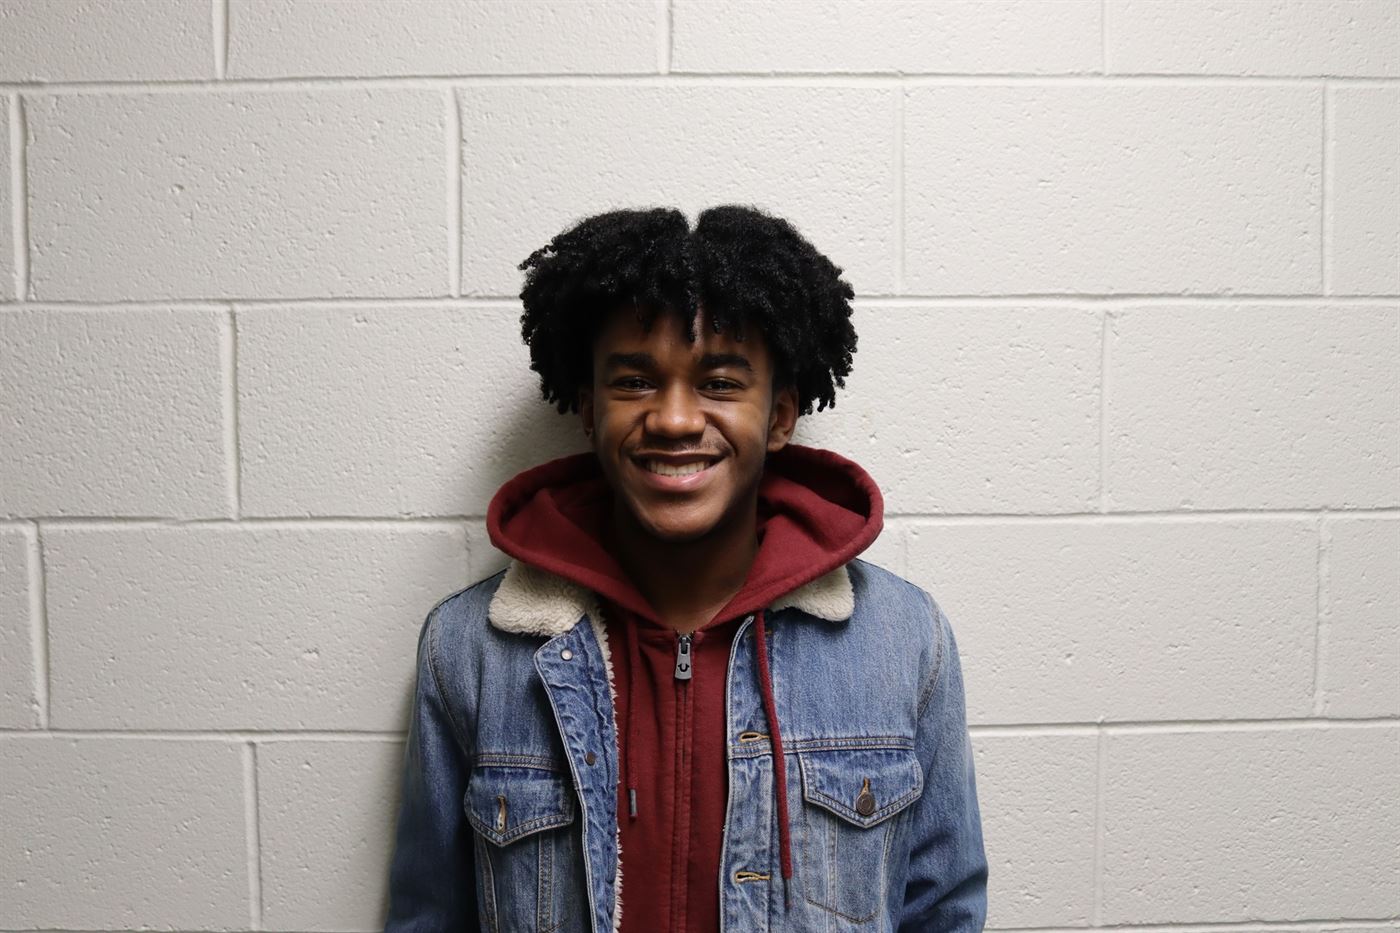 Myles Haywood, a freshman filmmaking major, thought the problems with the performance were handled profesionally.